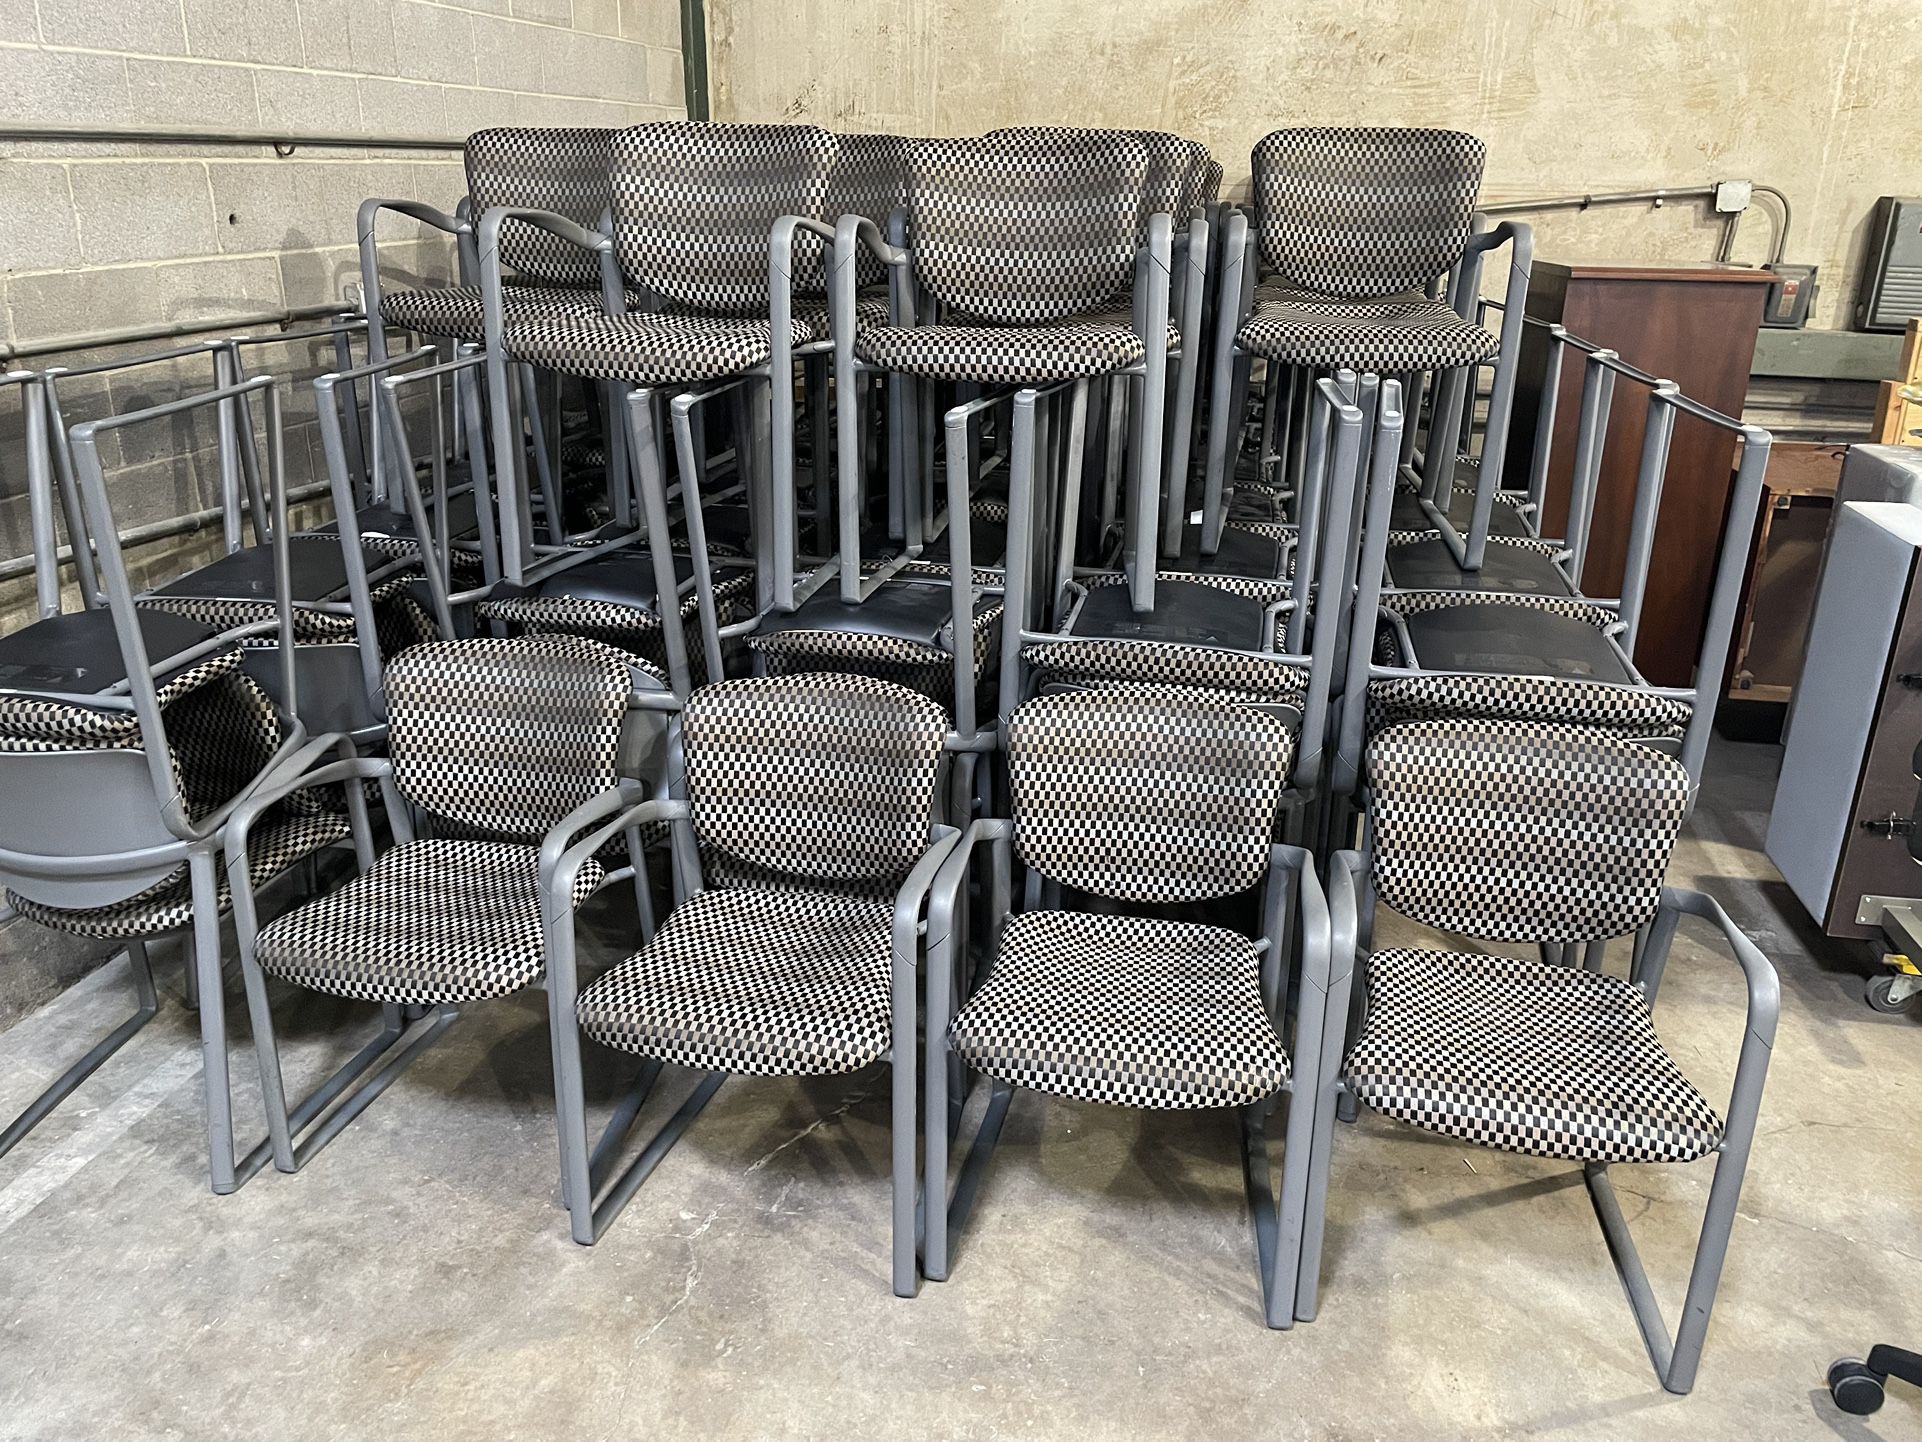 80 Matching Haworth Office Guest Chairs! Very Sturdy And Look Great! Only $30 Ea!